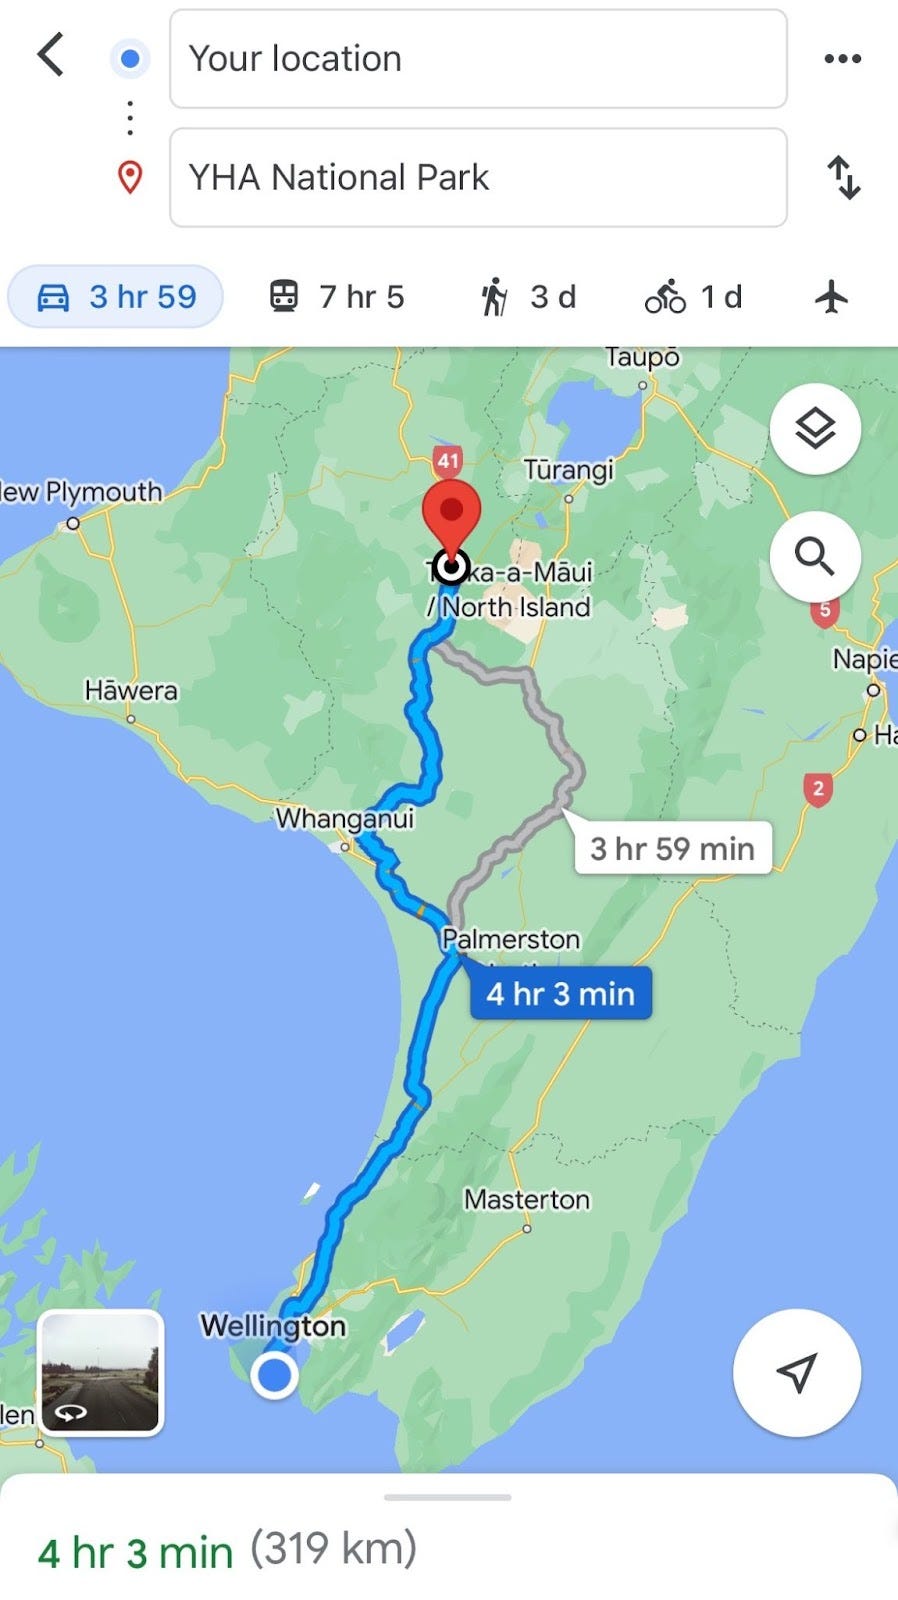 Google Maps mobile screenshot showing New Zealand’s North Island with a route from Wellington to the Tongariro National Park (YHA hostel). Showing 4 hours and 3 minutes and a distance of 319 km.